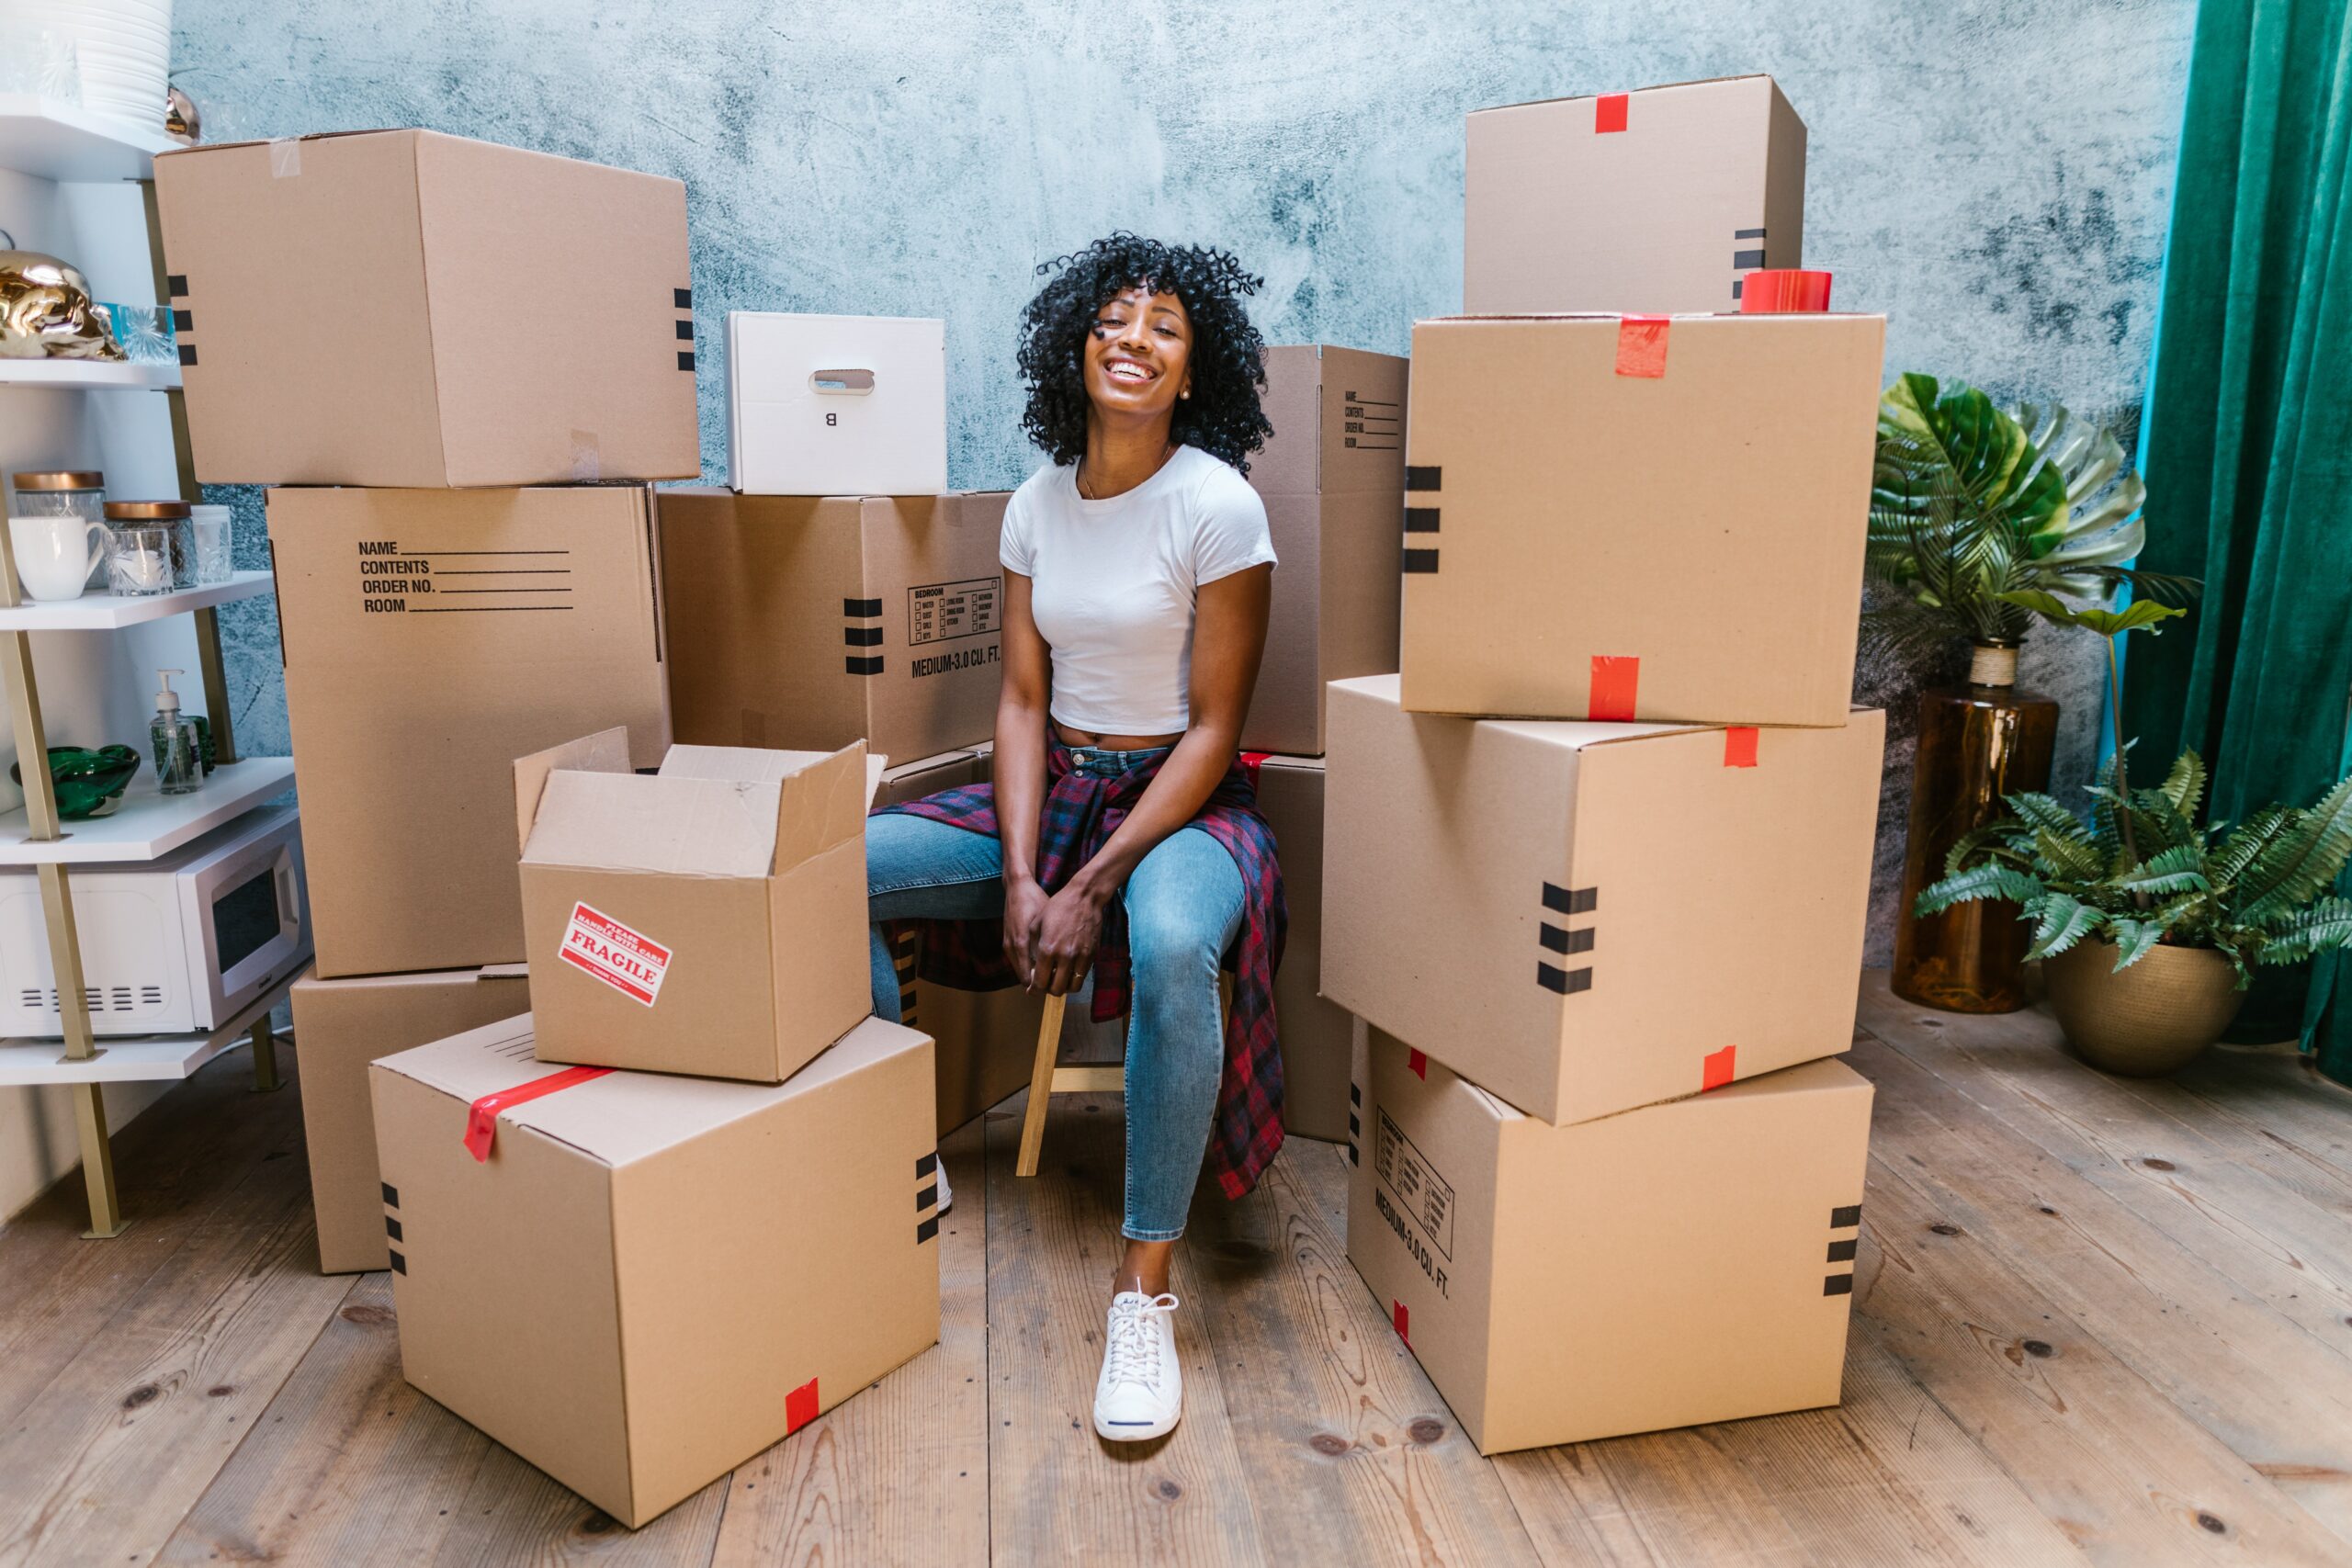 corporate moving, 7 Corporate Moving Tips When Relocating for a Job